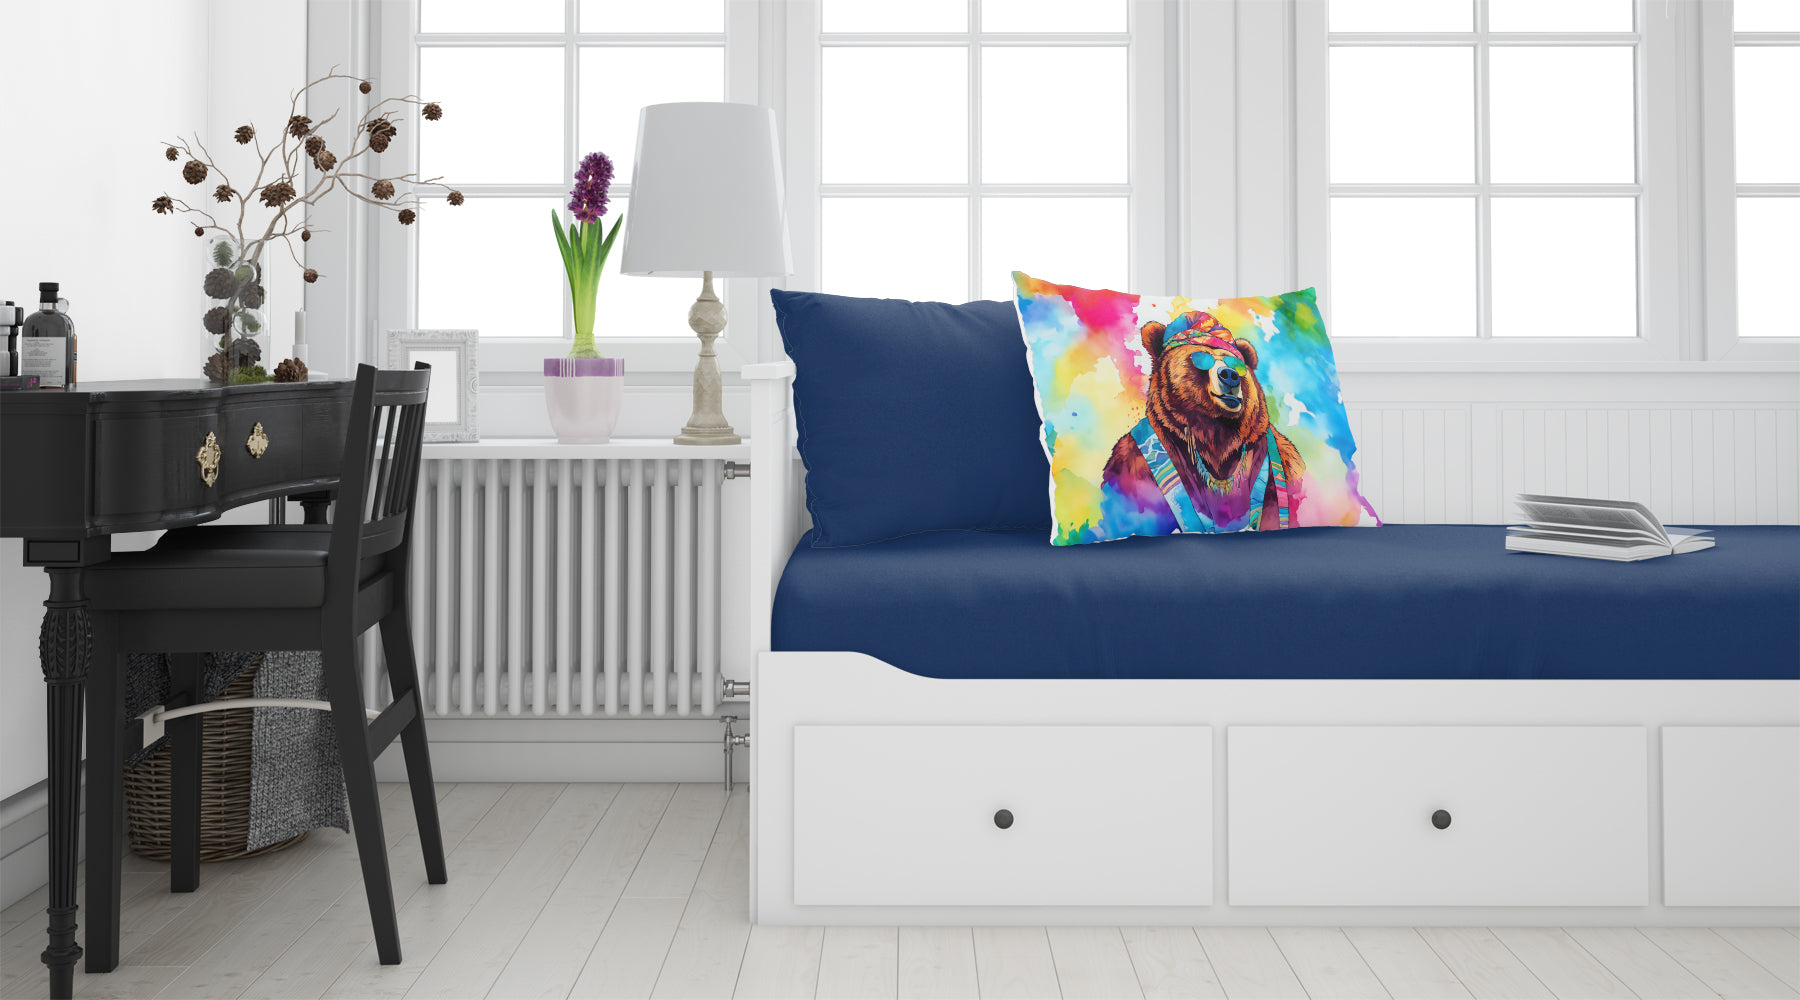 Buy this Hippie Animal Grizzly Bear Standard Pillowcase